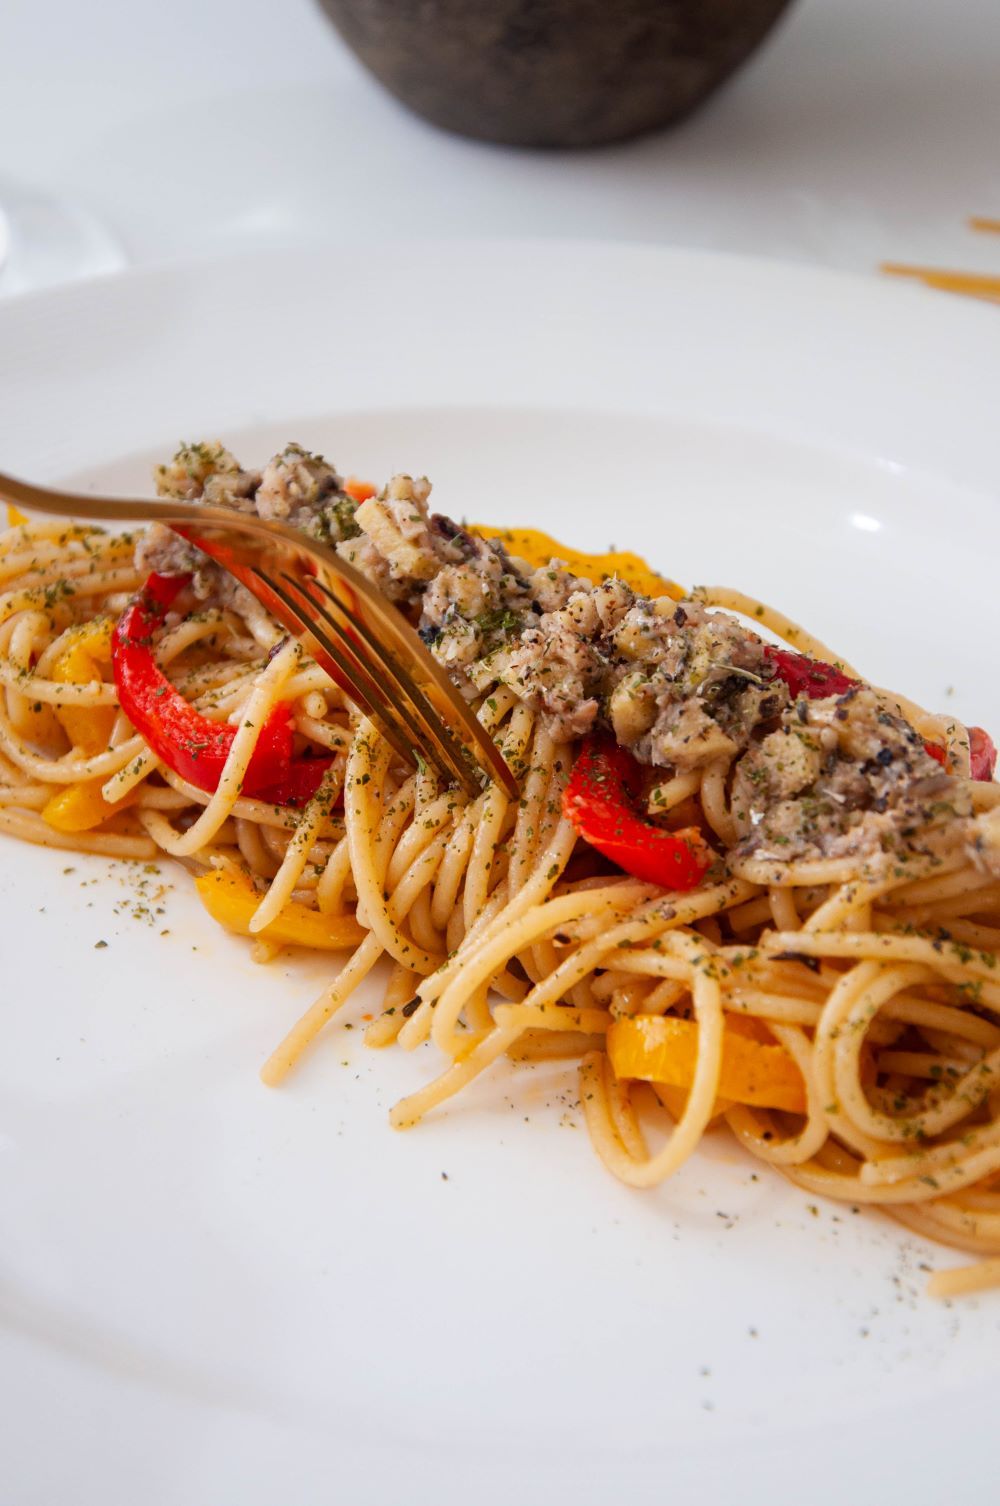 Presentation of Vermicelli with Bell Peppers, Ginger, and Anchovy Dressing